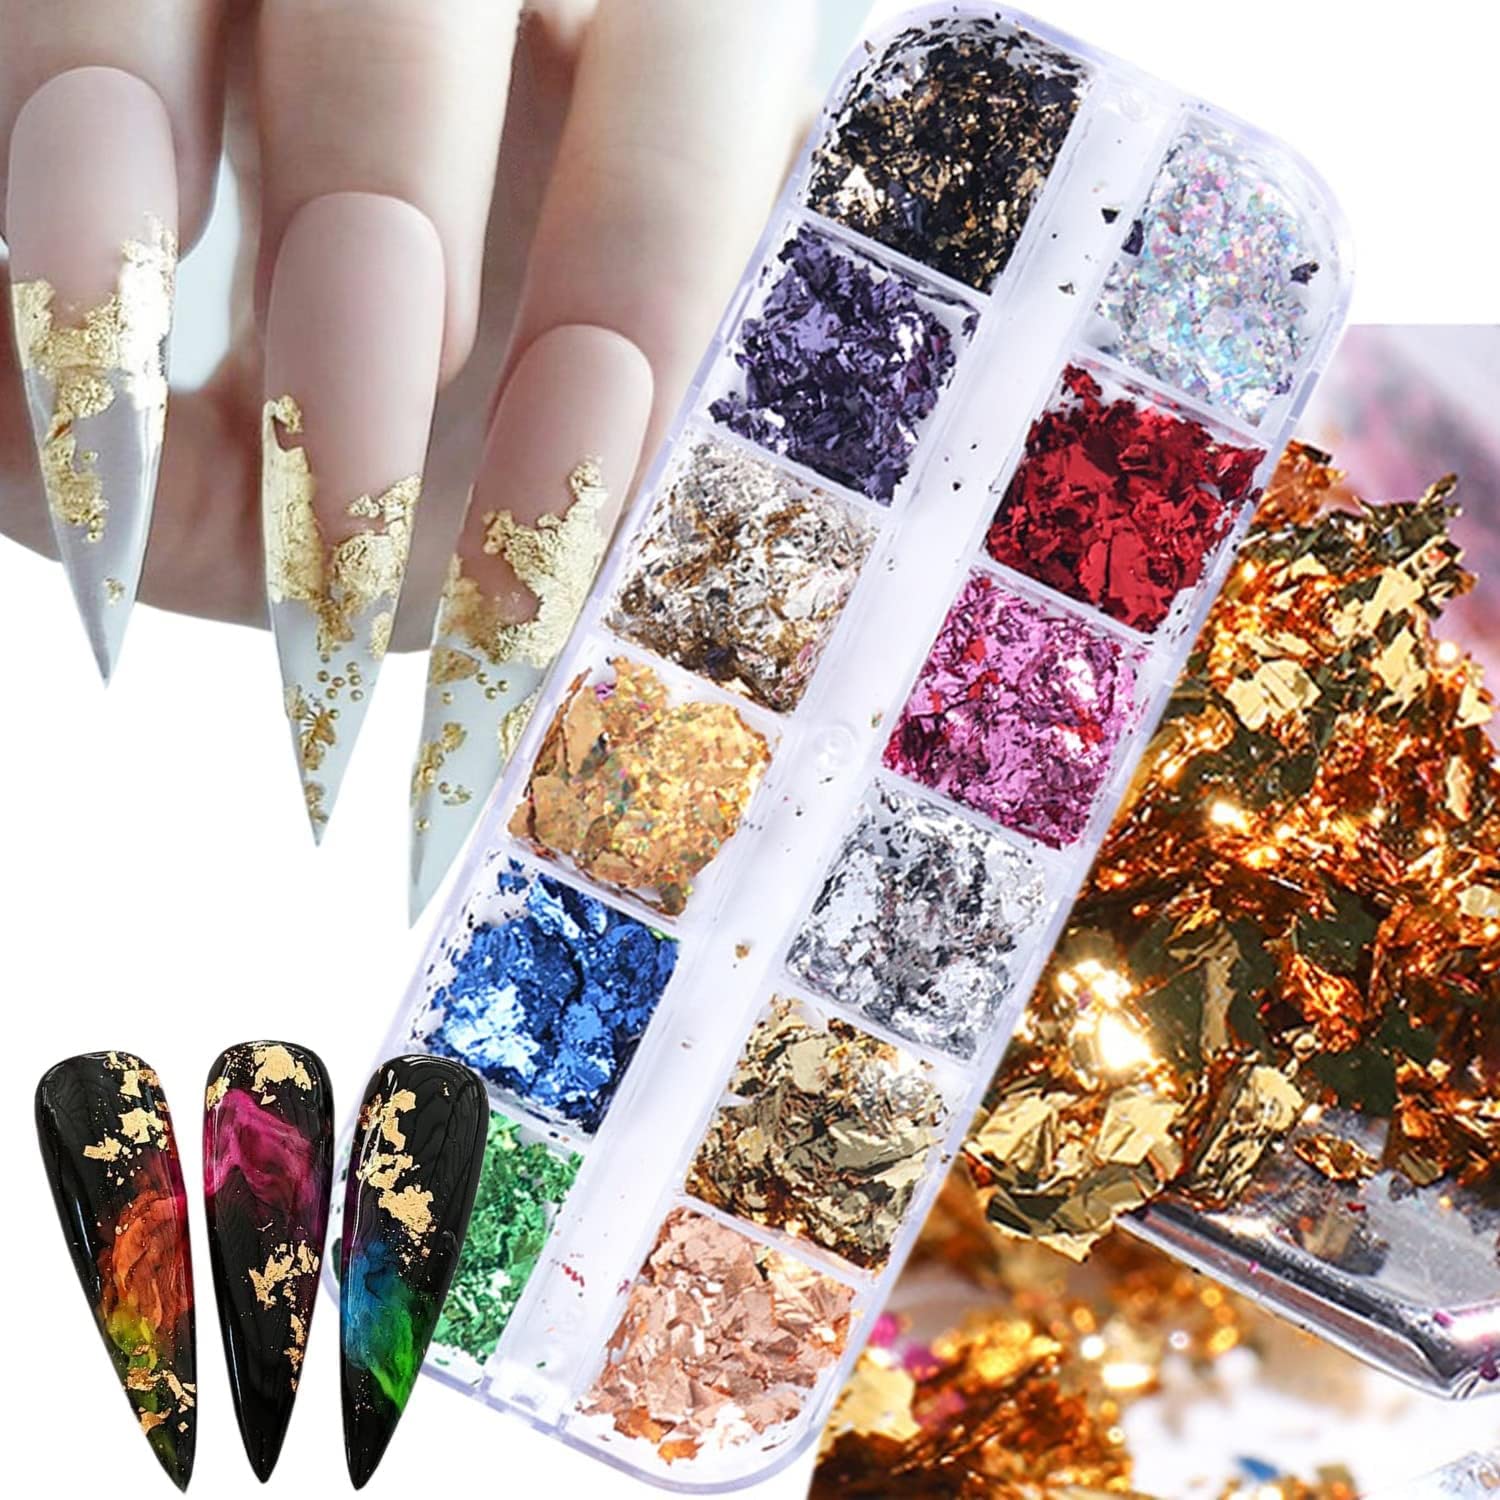 Gold Foil Nail Art Set Nail Art Decals Stickers Fragments Nail Foil Art  Nail Charms DIY Manicure Nails Design Decal Decoration Gold Silver Leaf  Flakes 12 Grids/Set